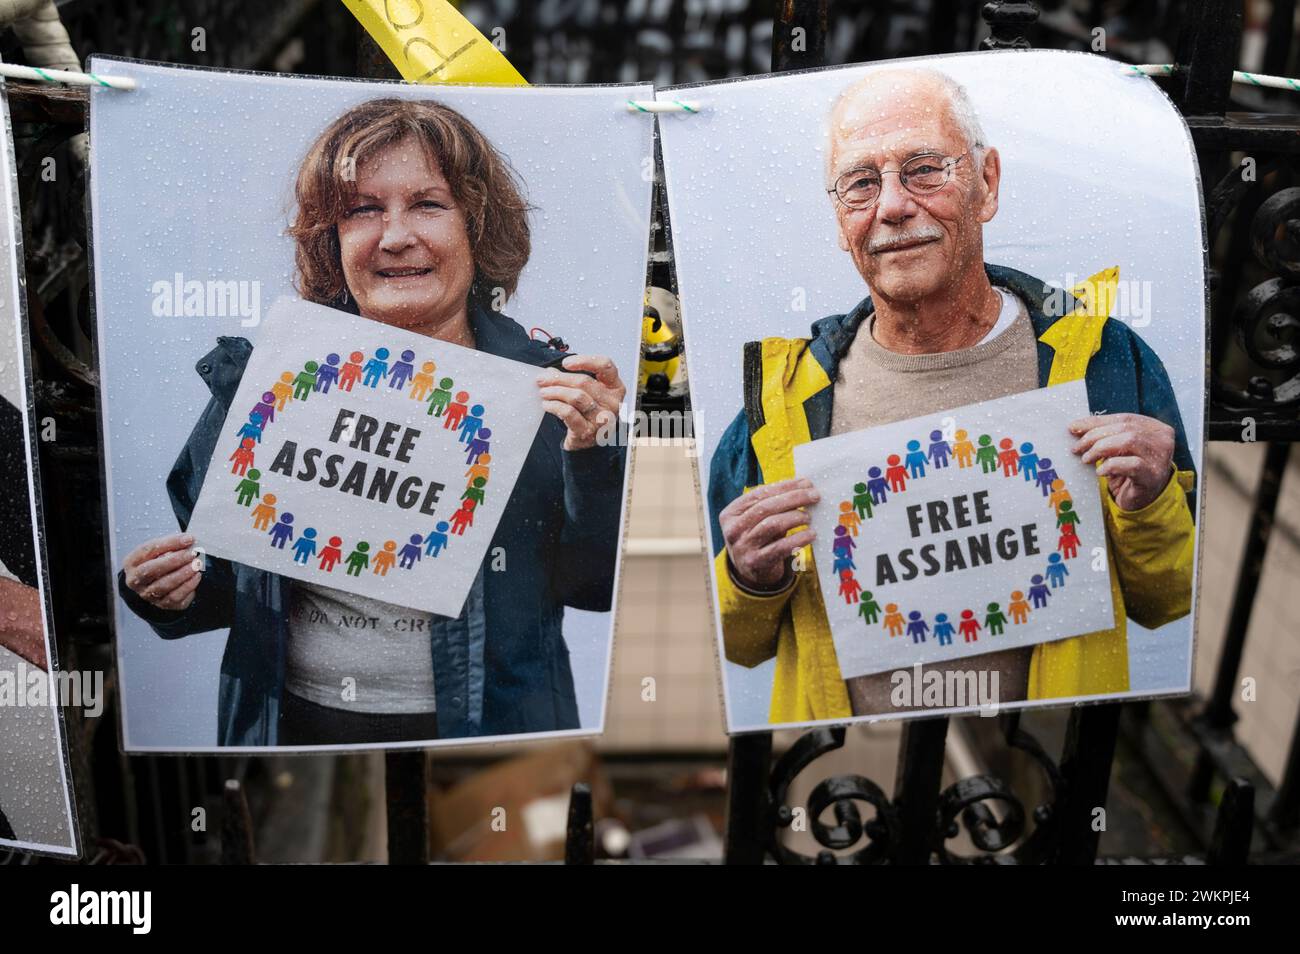 Supporters of Wikileaks founder Julian Assange demonstrate outside the Royal Courts of Justice demanding his freedom on the second day of a hearing to Stock Photo